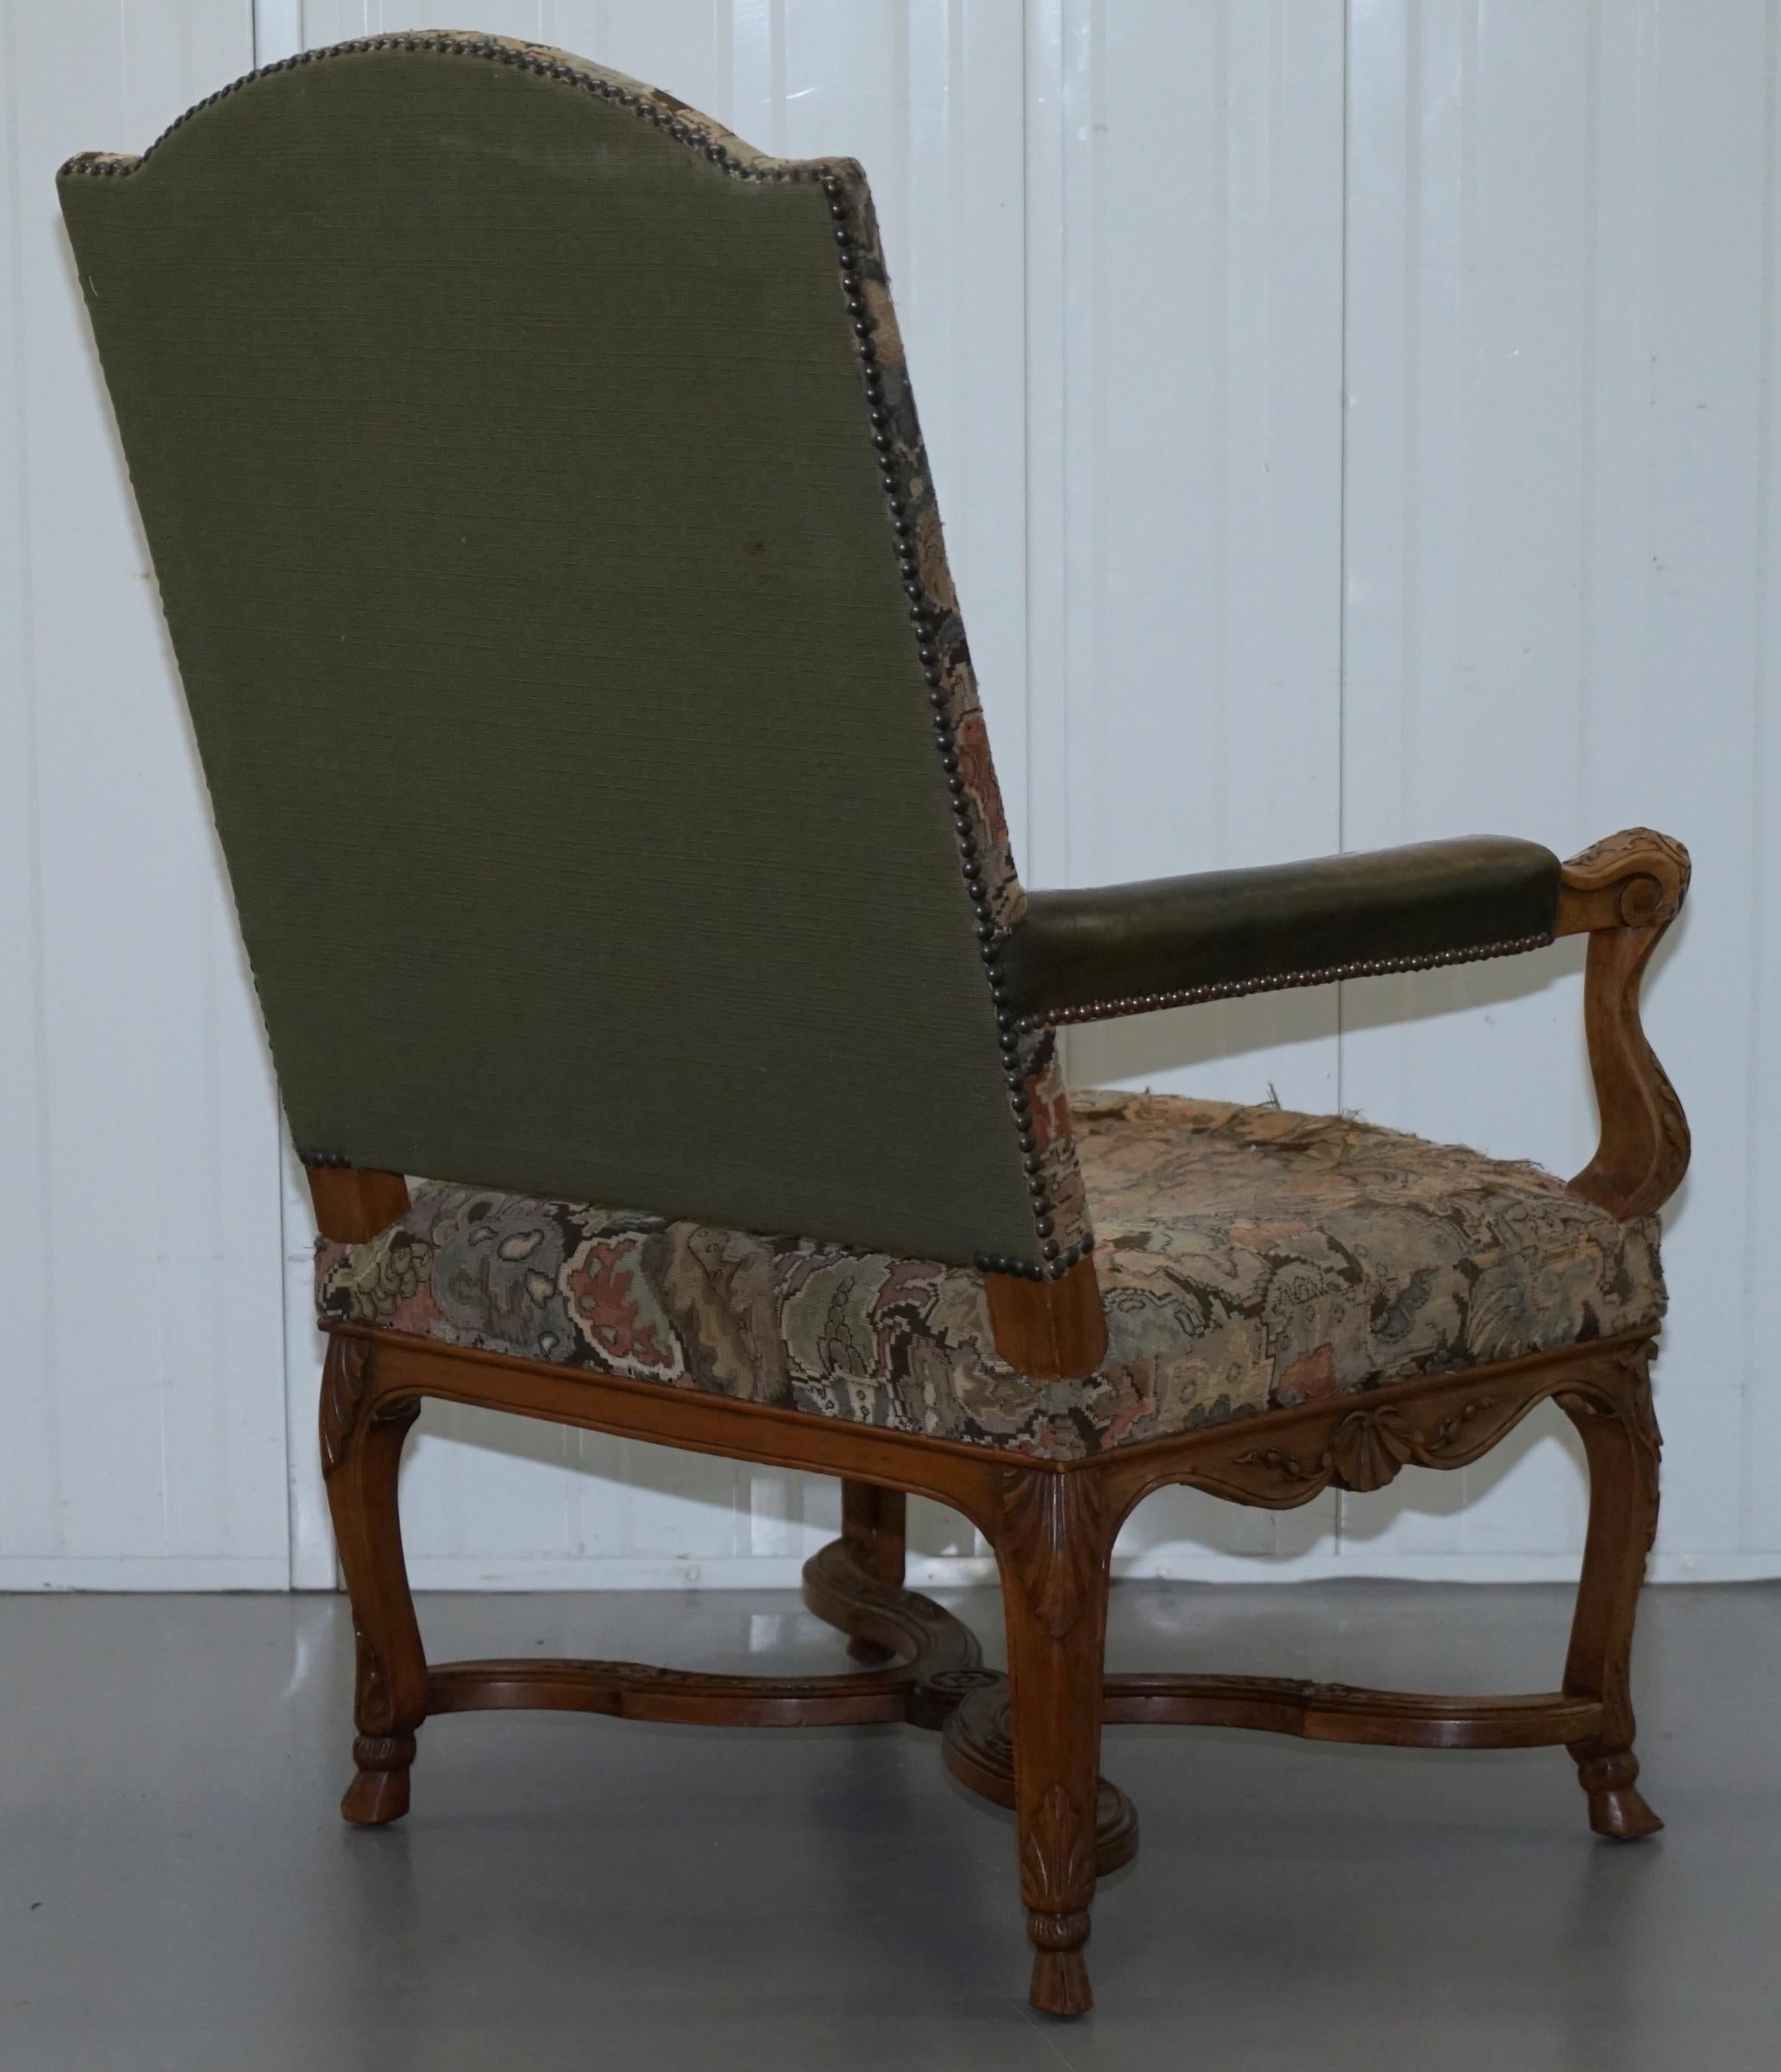 Rare 19th Century French Embroidered Armchair Ornately Carved Frame High Back For Sale 8